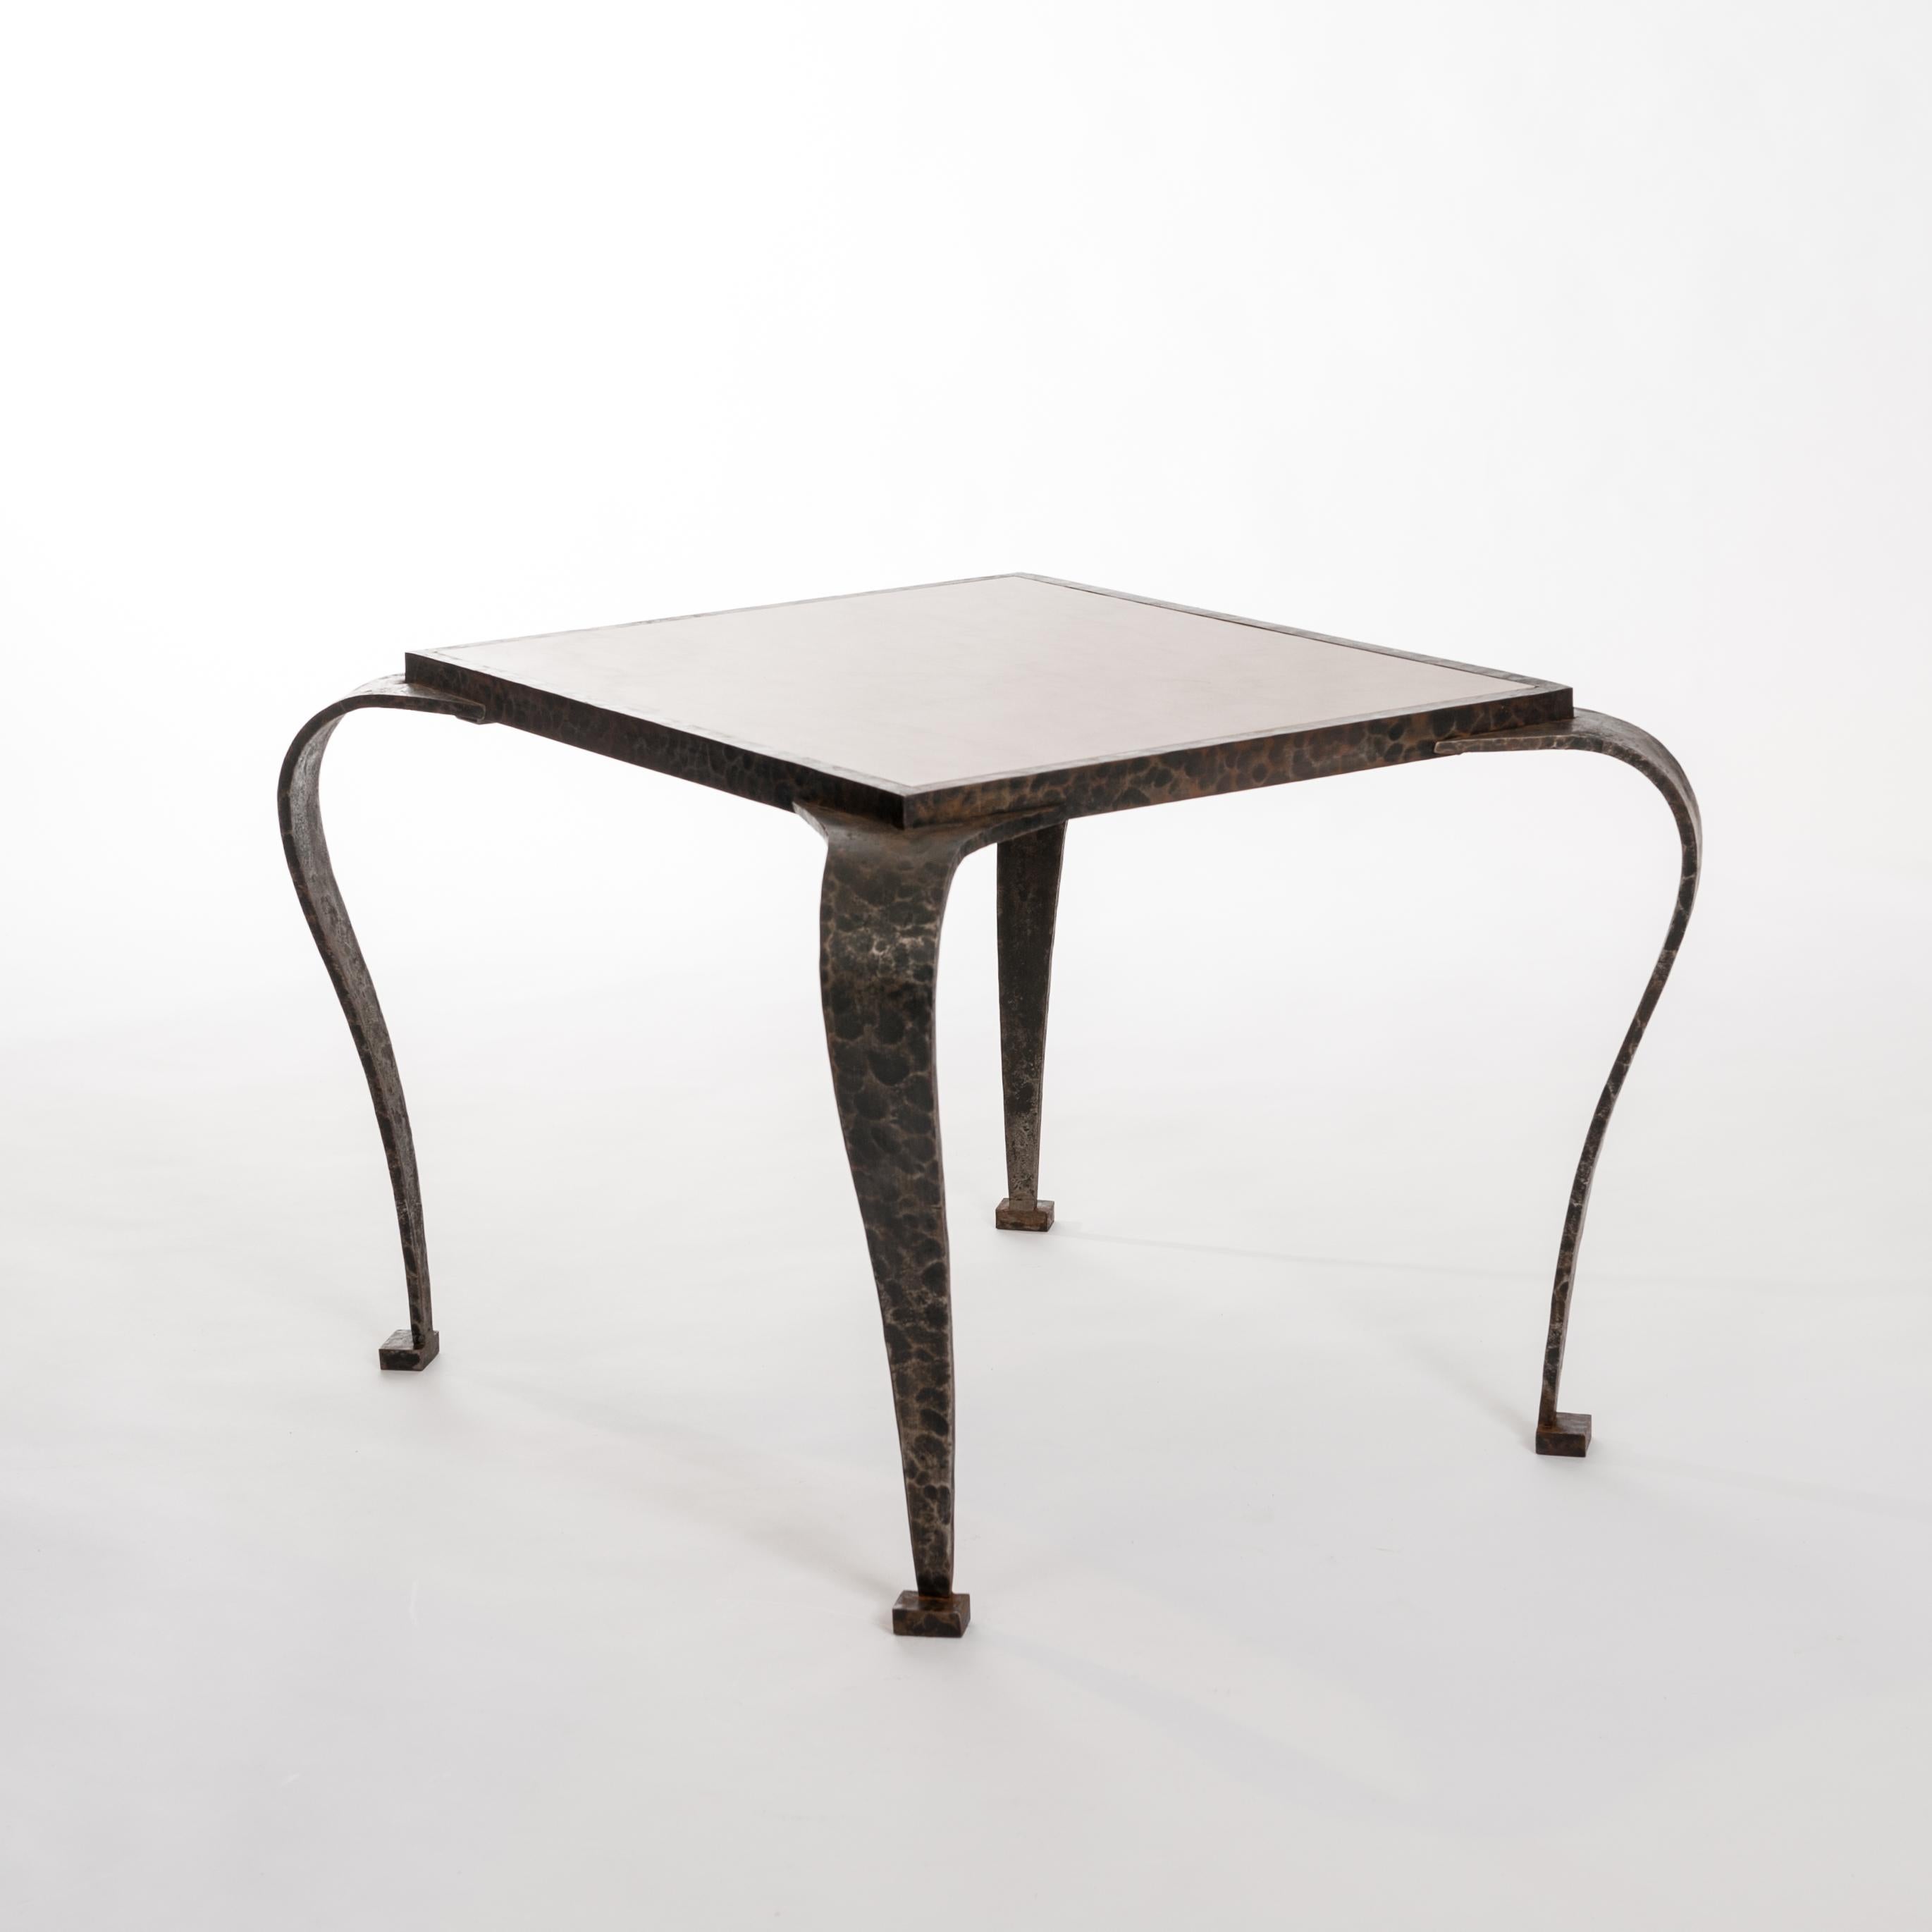 Forged Italian Art Déco Side Table Solid Iron with Marble Top Attributed to V. Ducrot For Sale